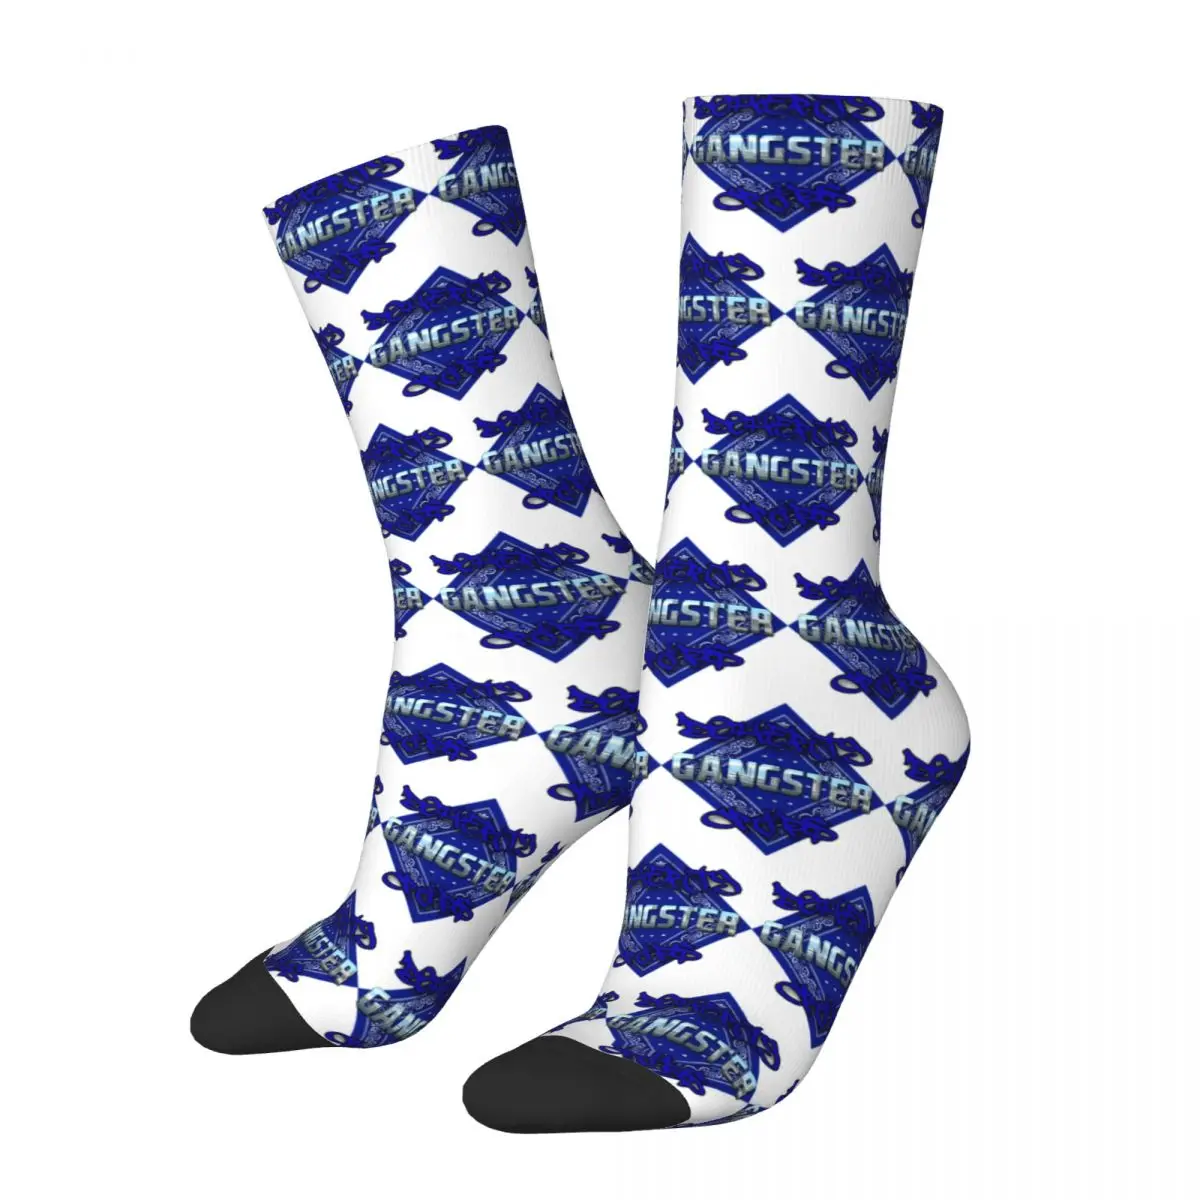 

Doherty Gangster Crips R346 Stocking Casual Graphic The Best Buy Funny Novelty Contrast color Elastic Socks